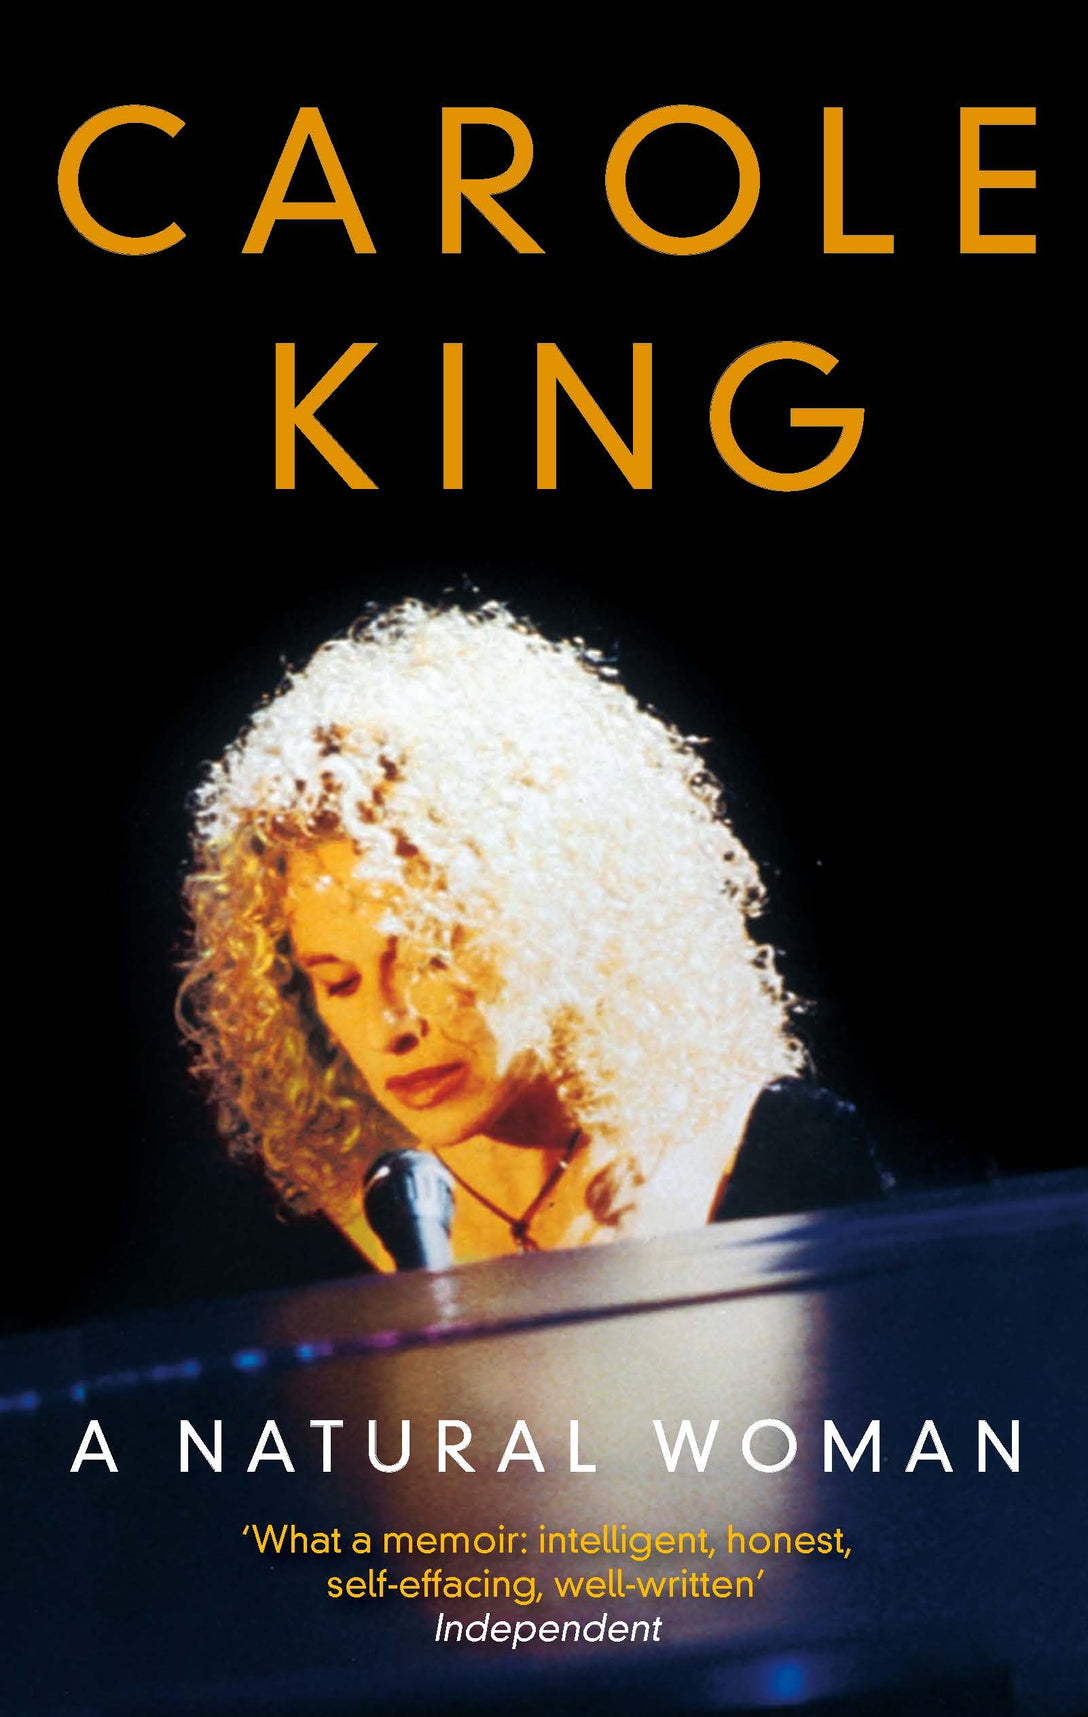 A Natural Woman by Carole King